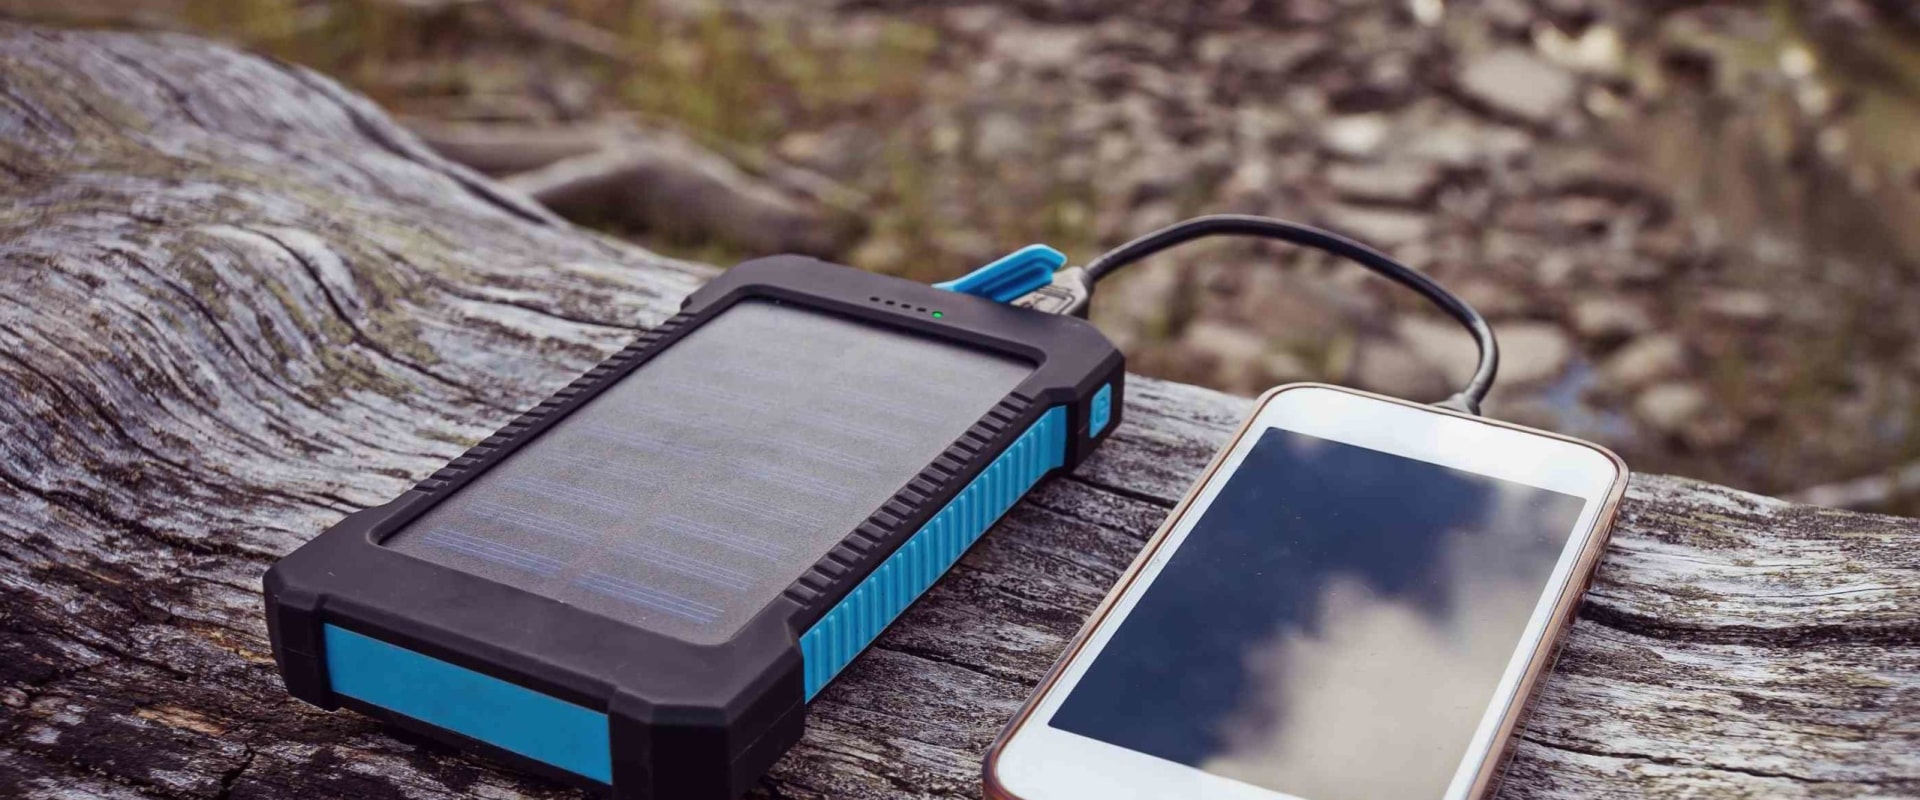 How to Use a Solar Power Bank Charger